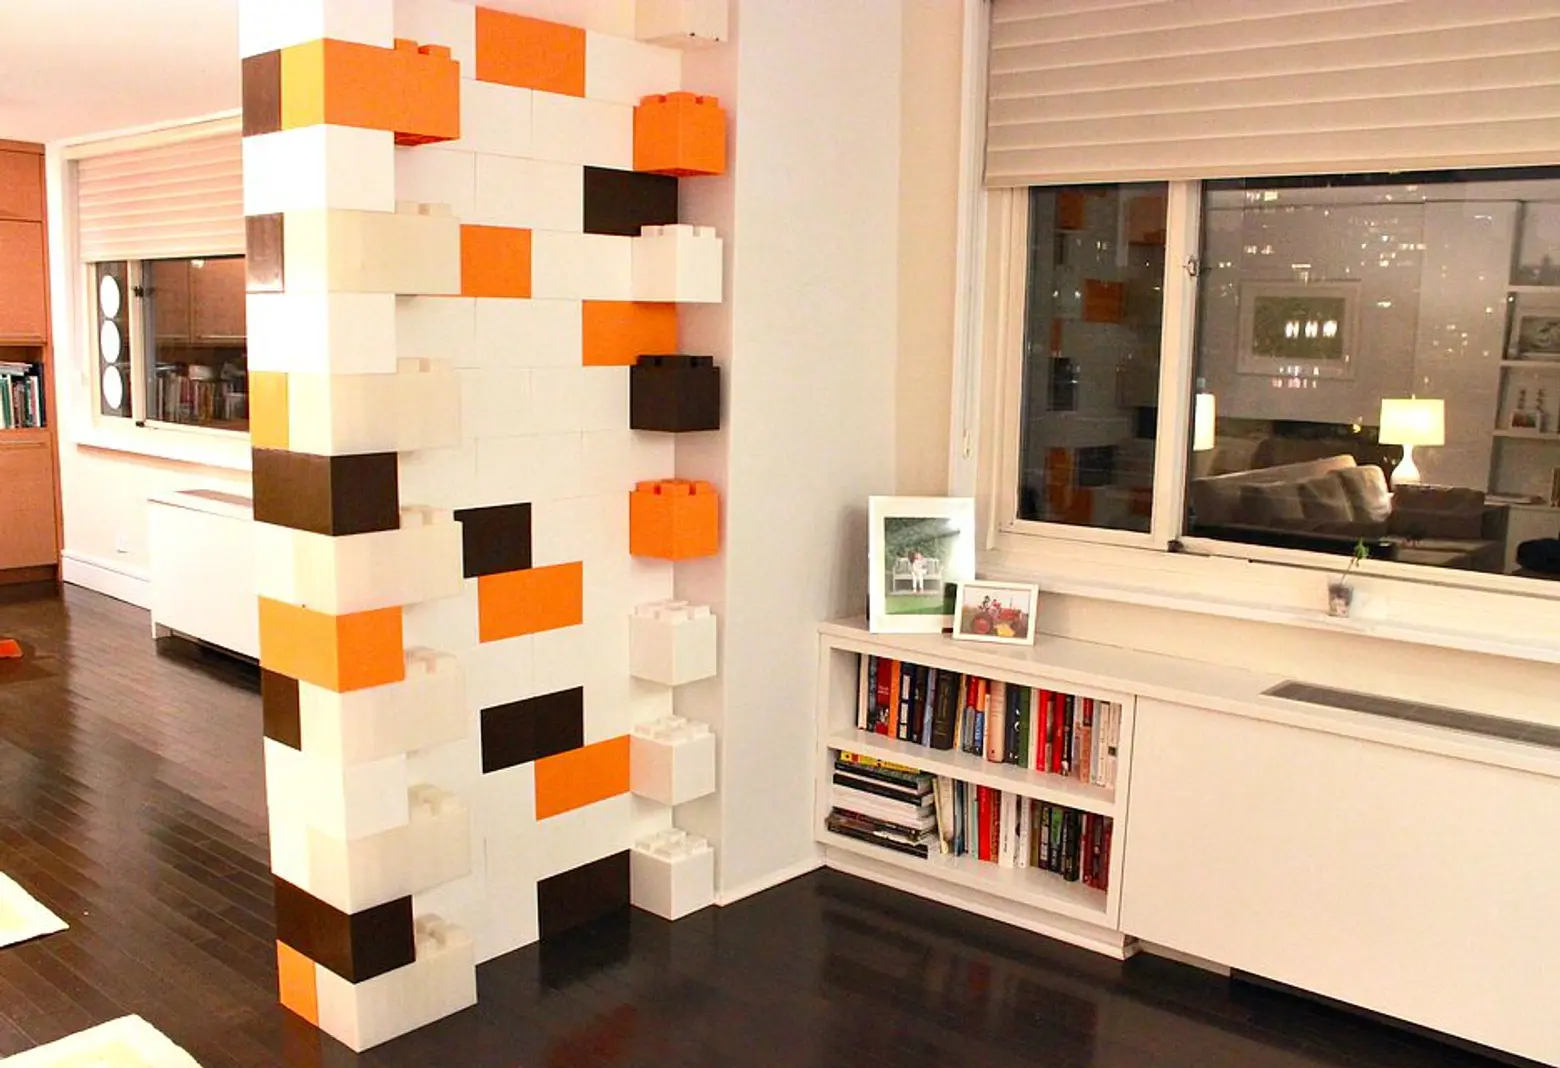 Giant LEGO Blocks Let Build Anything from a Coffee to an Room | 6sqft